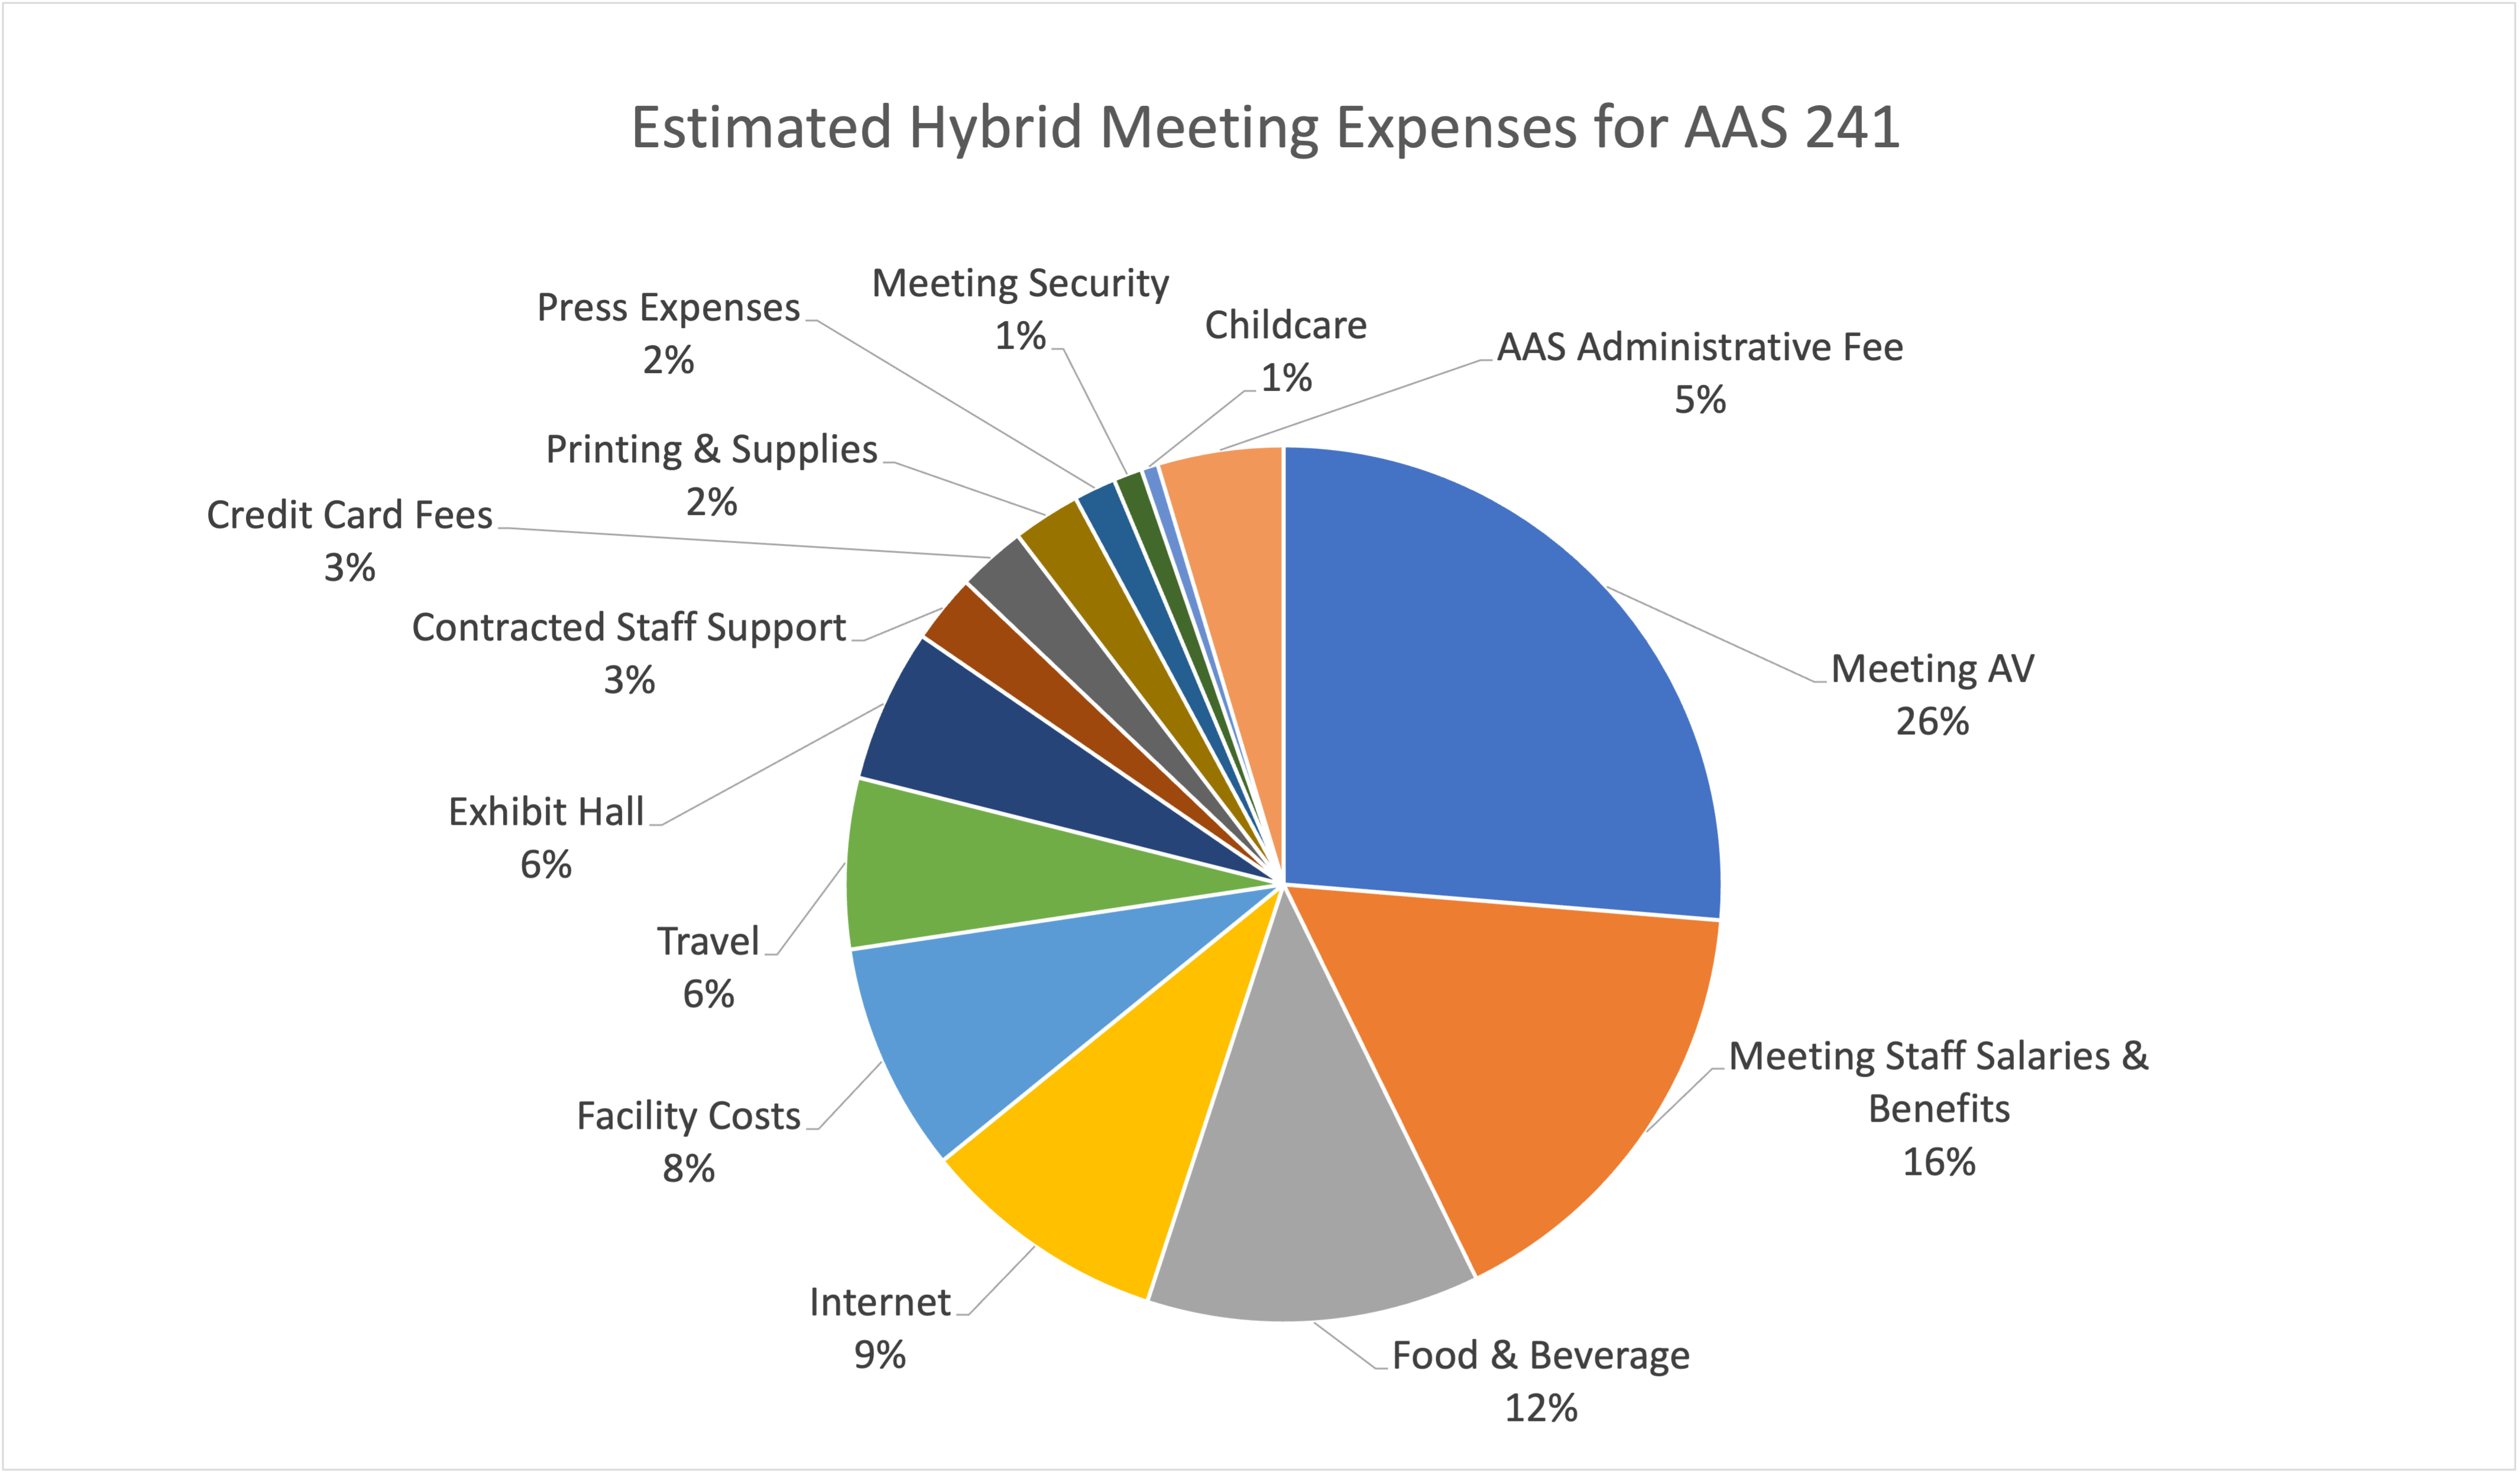 Pie chart detailing 14 categories of expenses for AAS 241